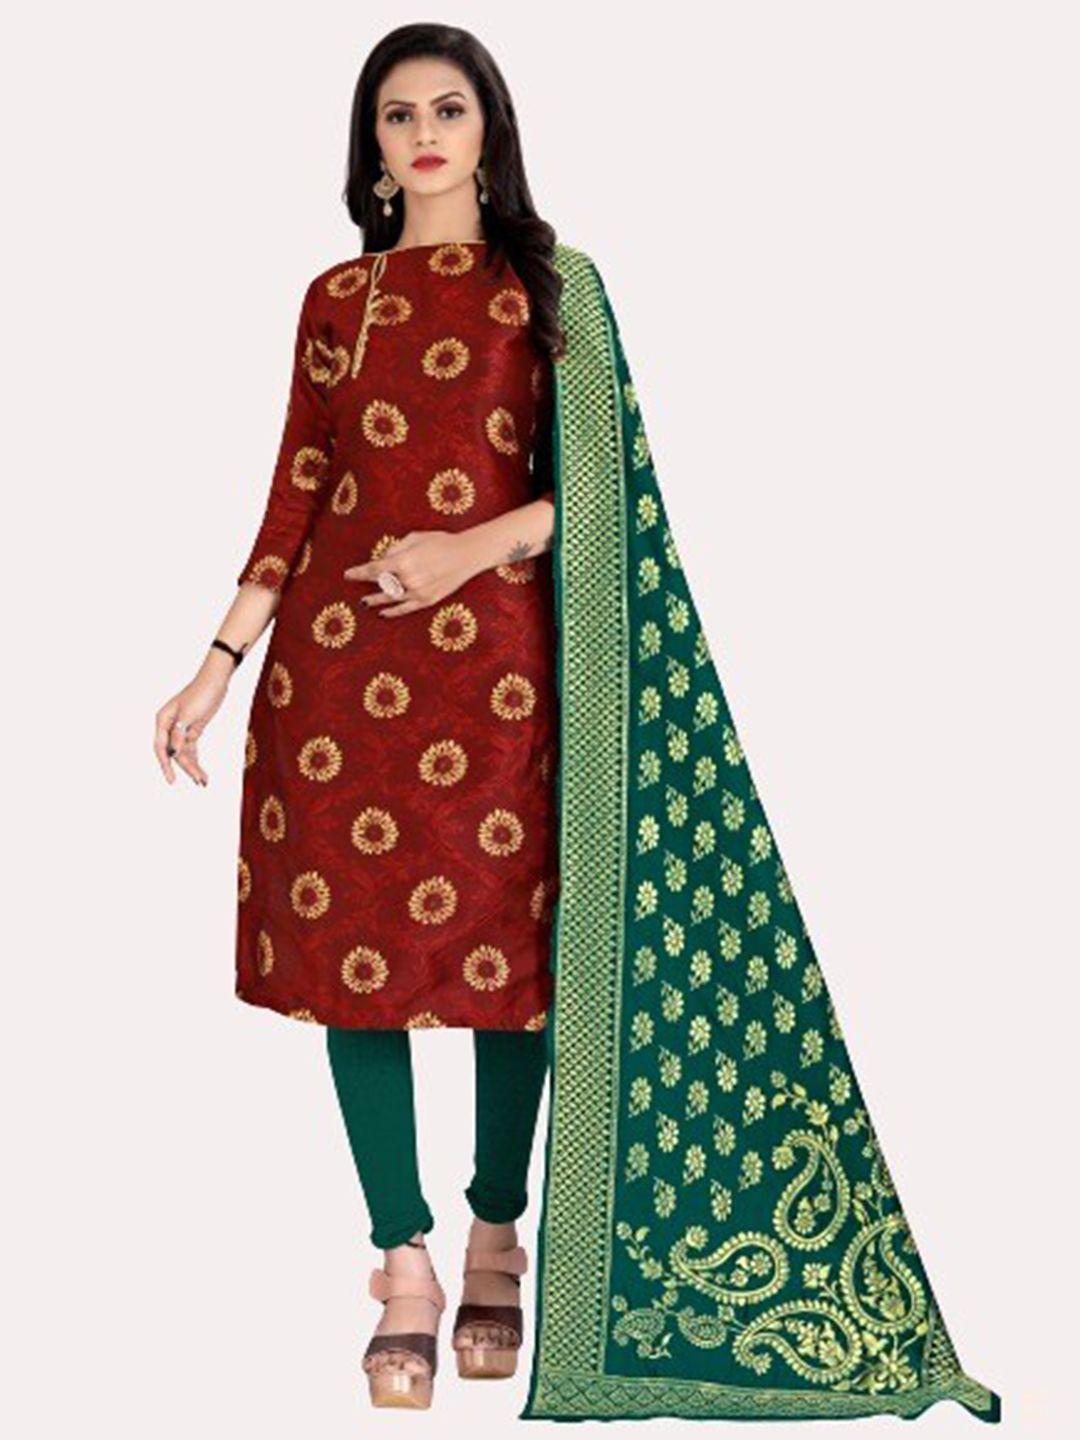 morly maroon & green dupion silk unstitched dress material